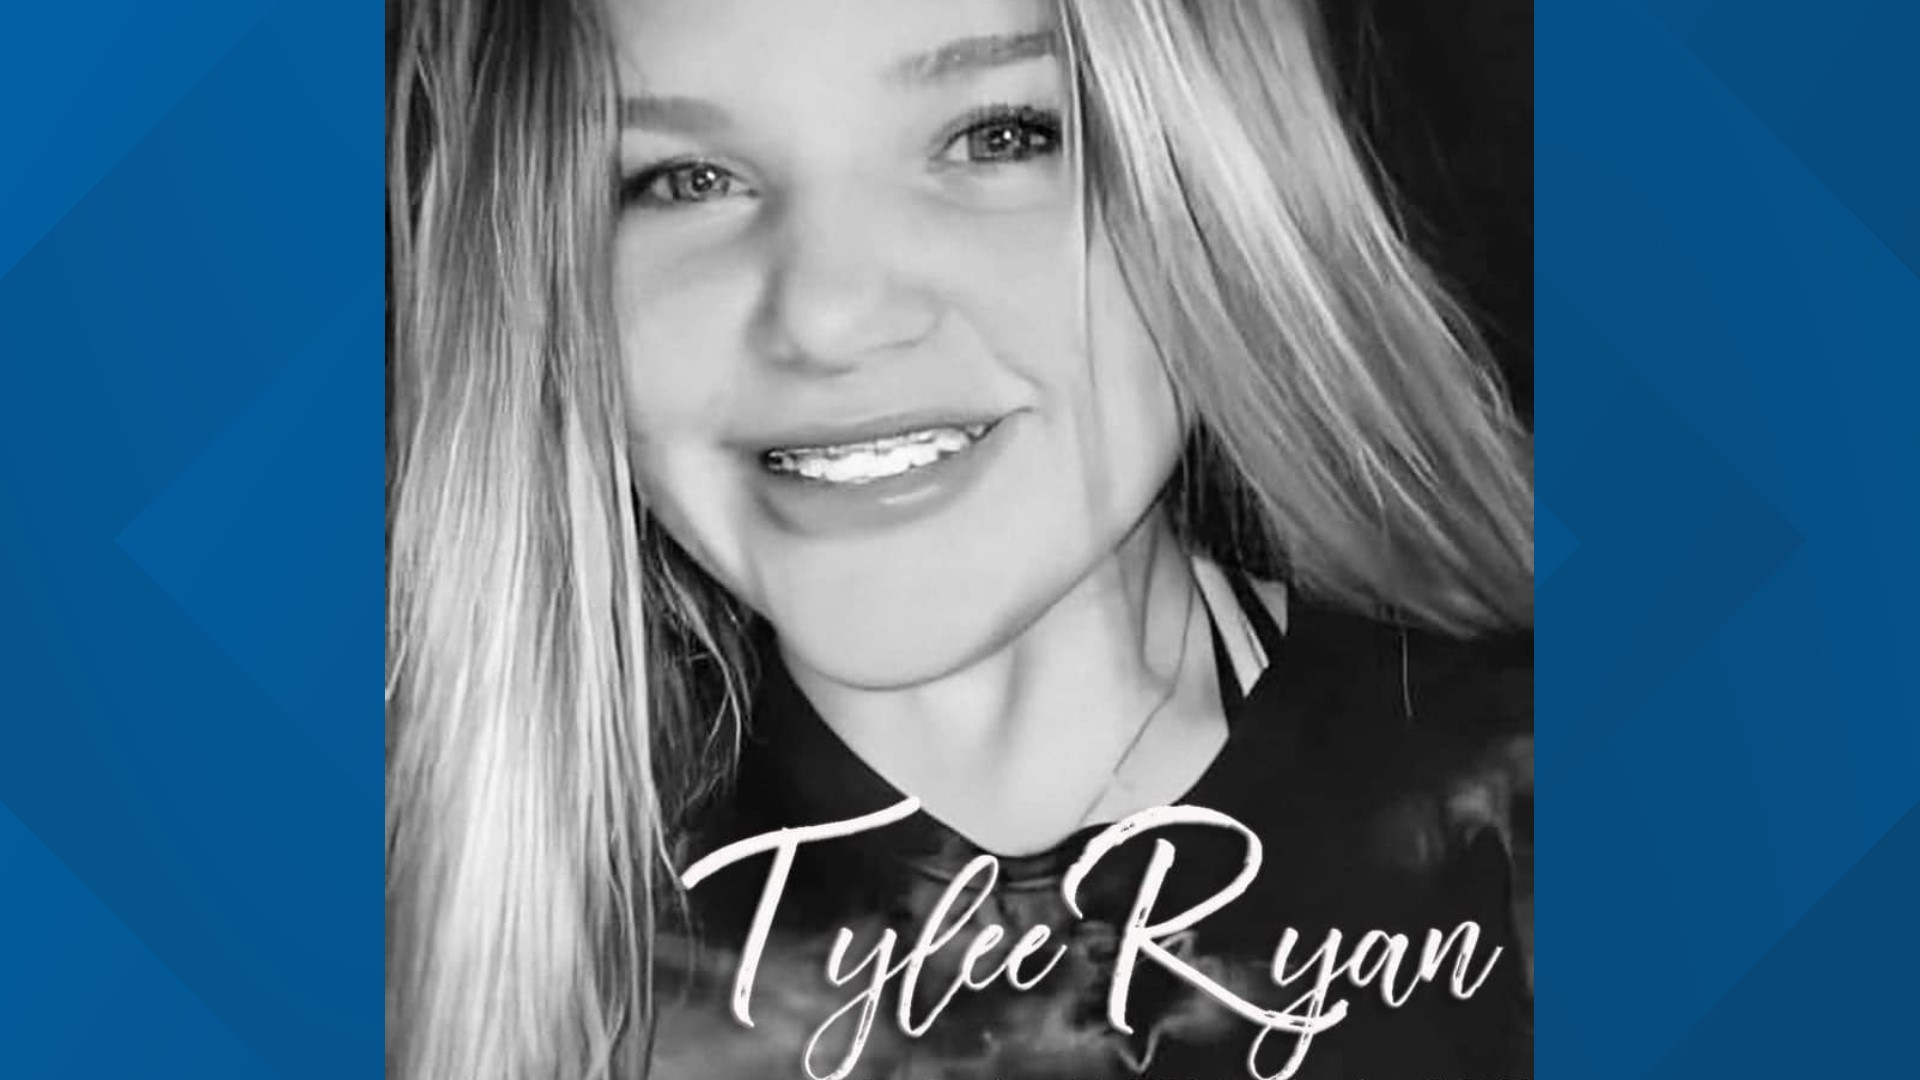 Tylee Ryans Aunt Marks Slain Teens 18th Birthday With Online Tribute 7033